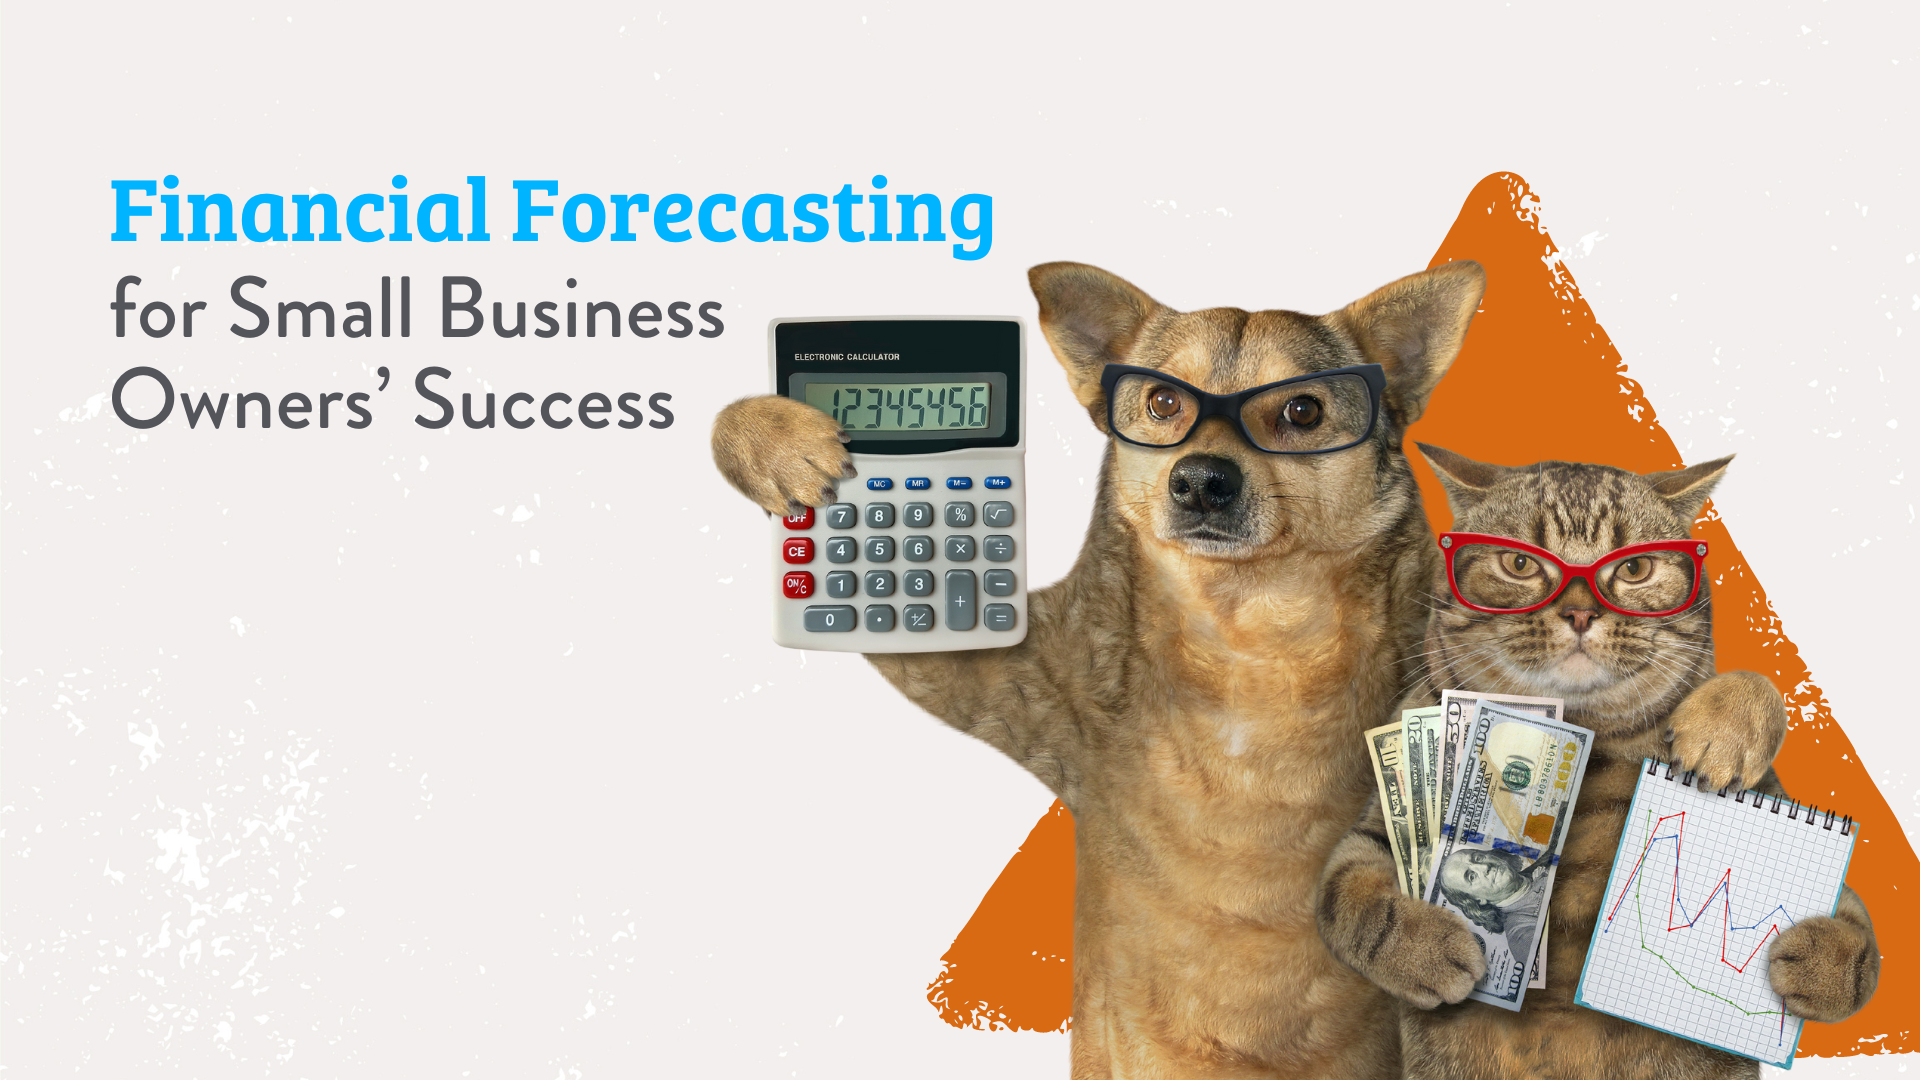 Financial Forecasting for Small Business Owners Success